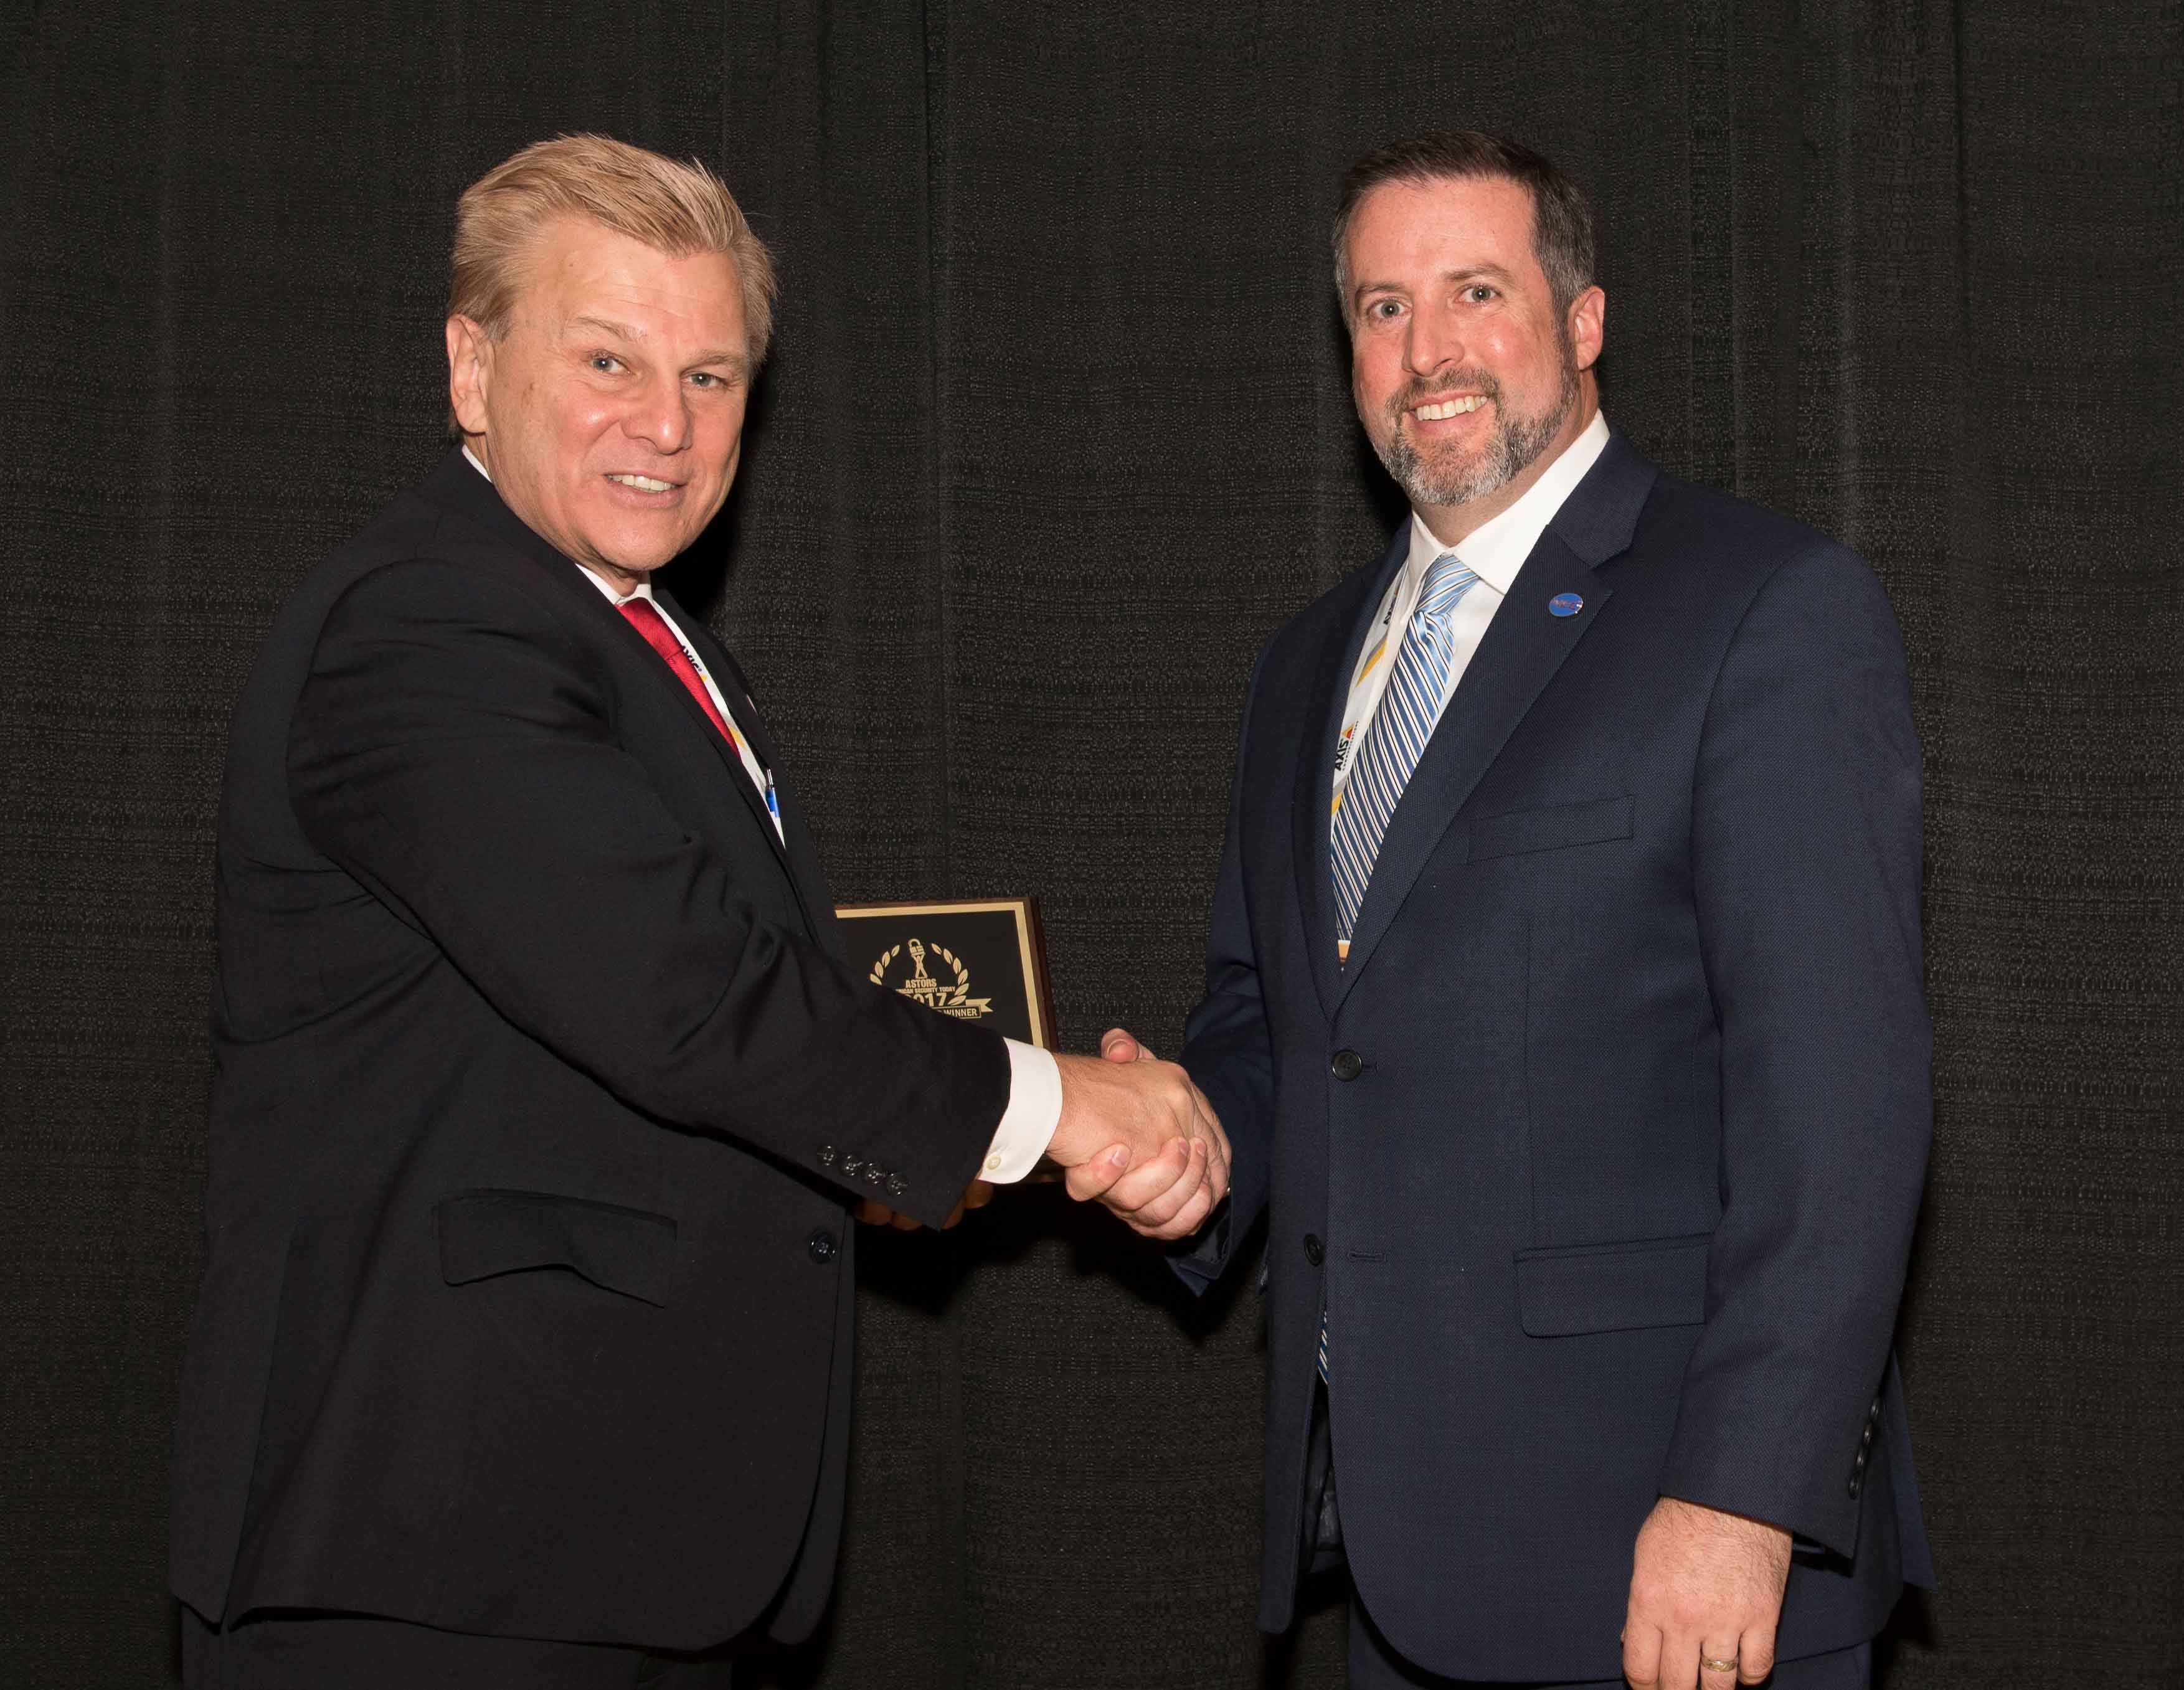 Bill Carleton, Senior Project Manager, Federal at NEC Corporation of America accepting the 2017 ‘ASTORS’ Award at ISC East.